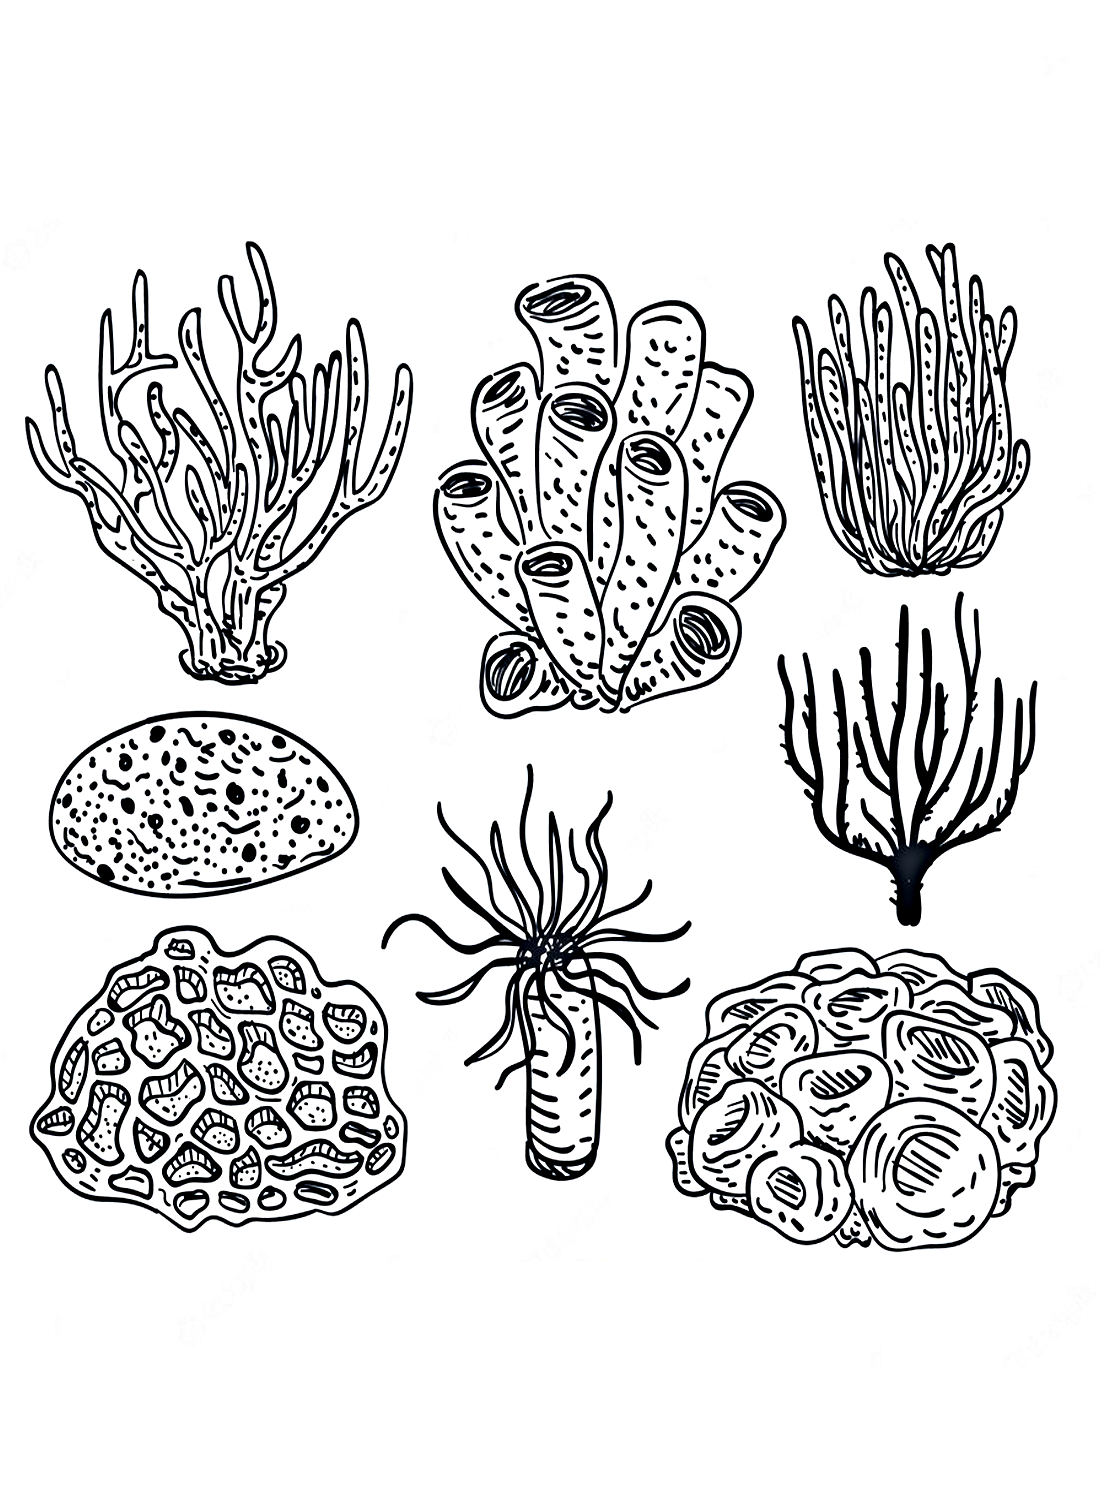 Coral collection Coloring Page